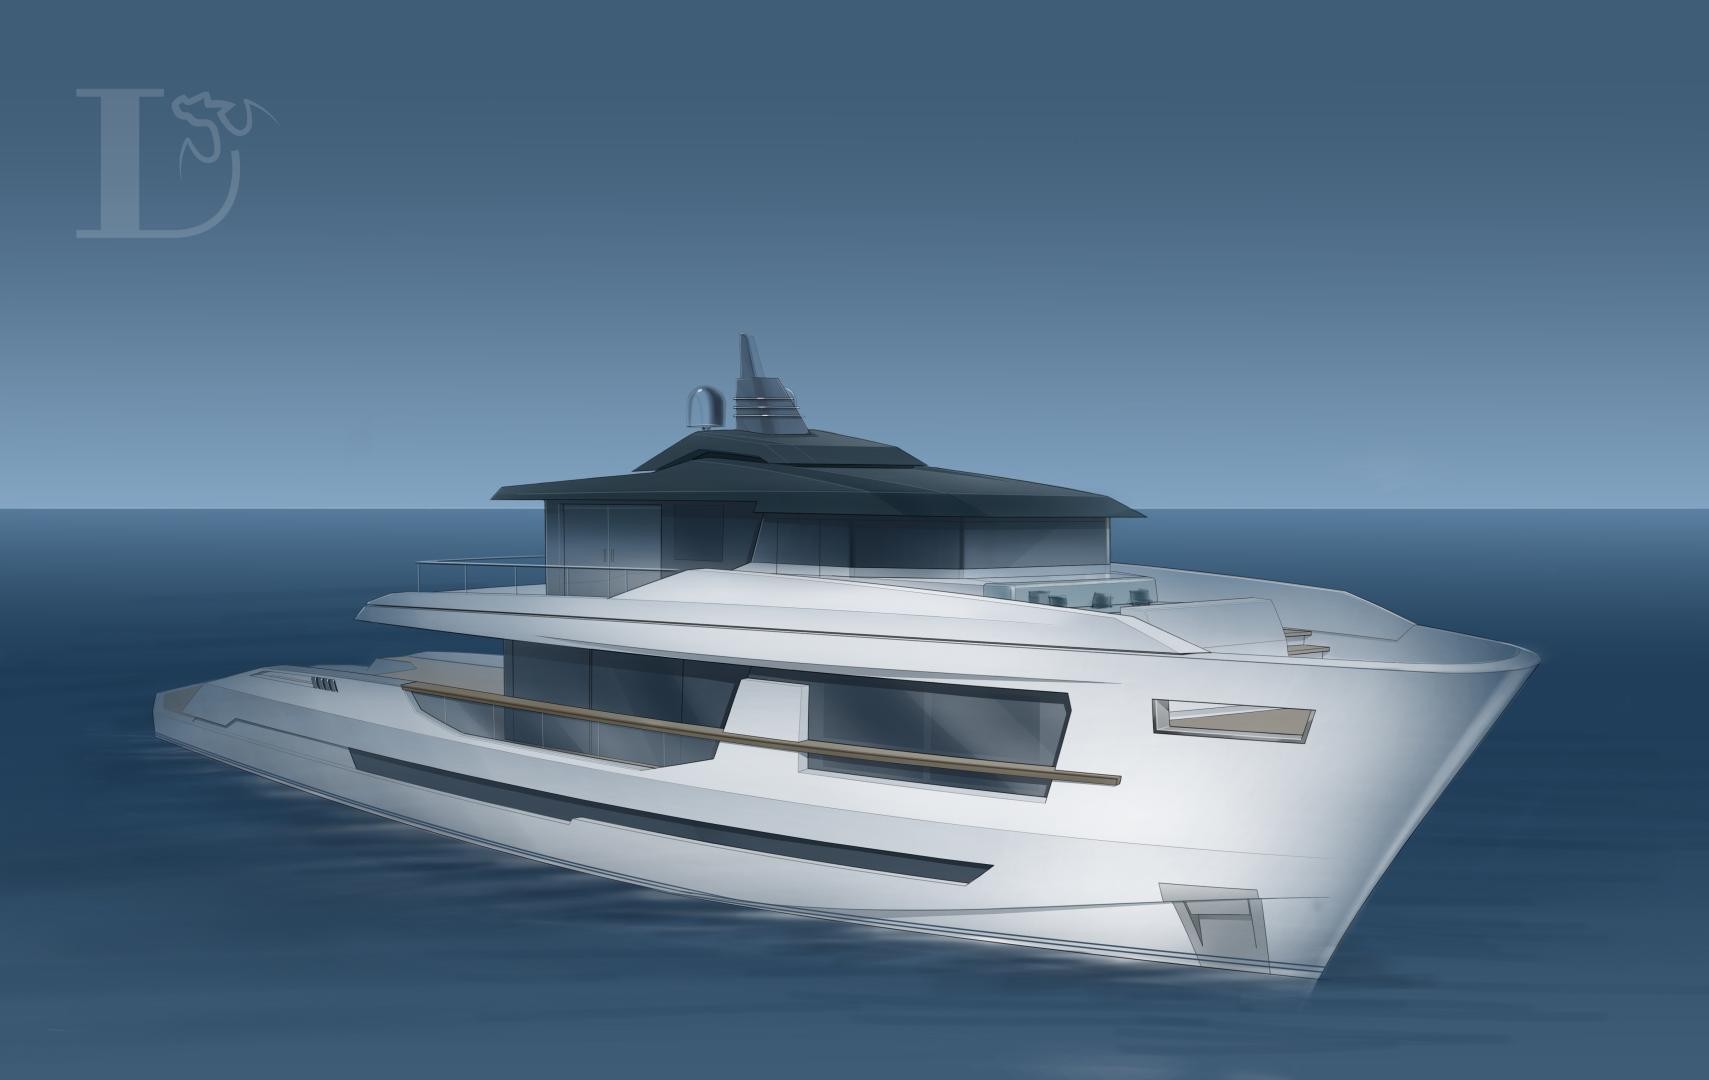 Lynx Yachts unveils crossover ORION